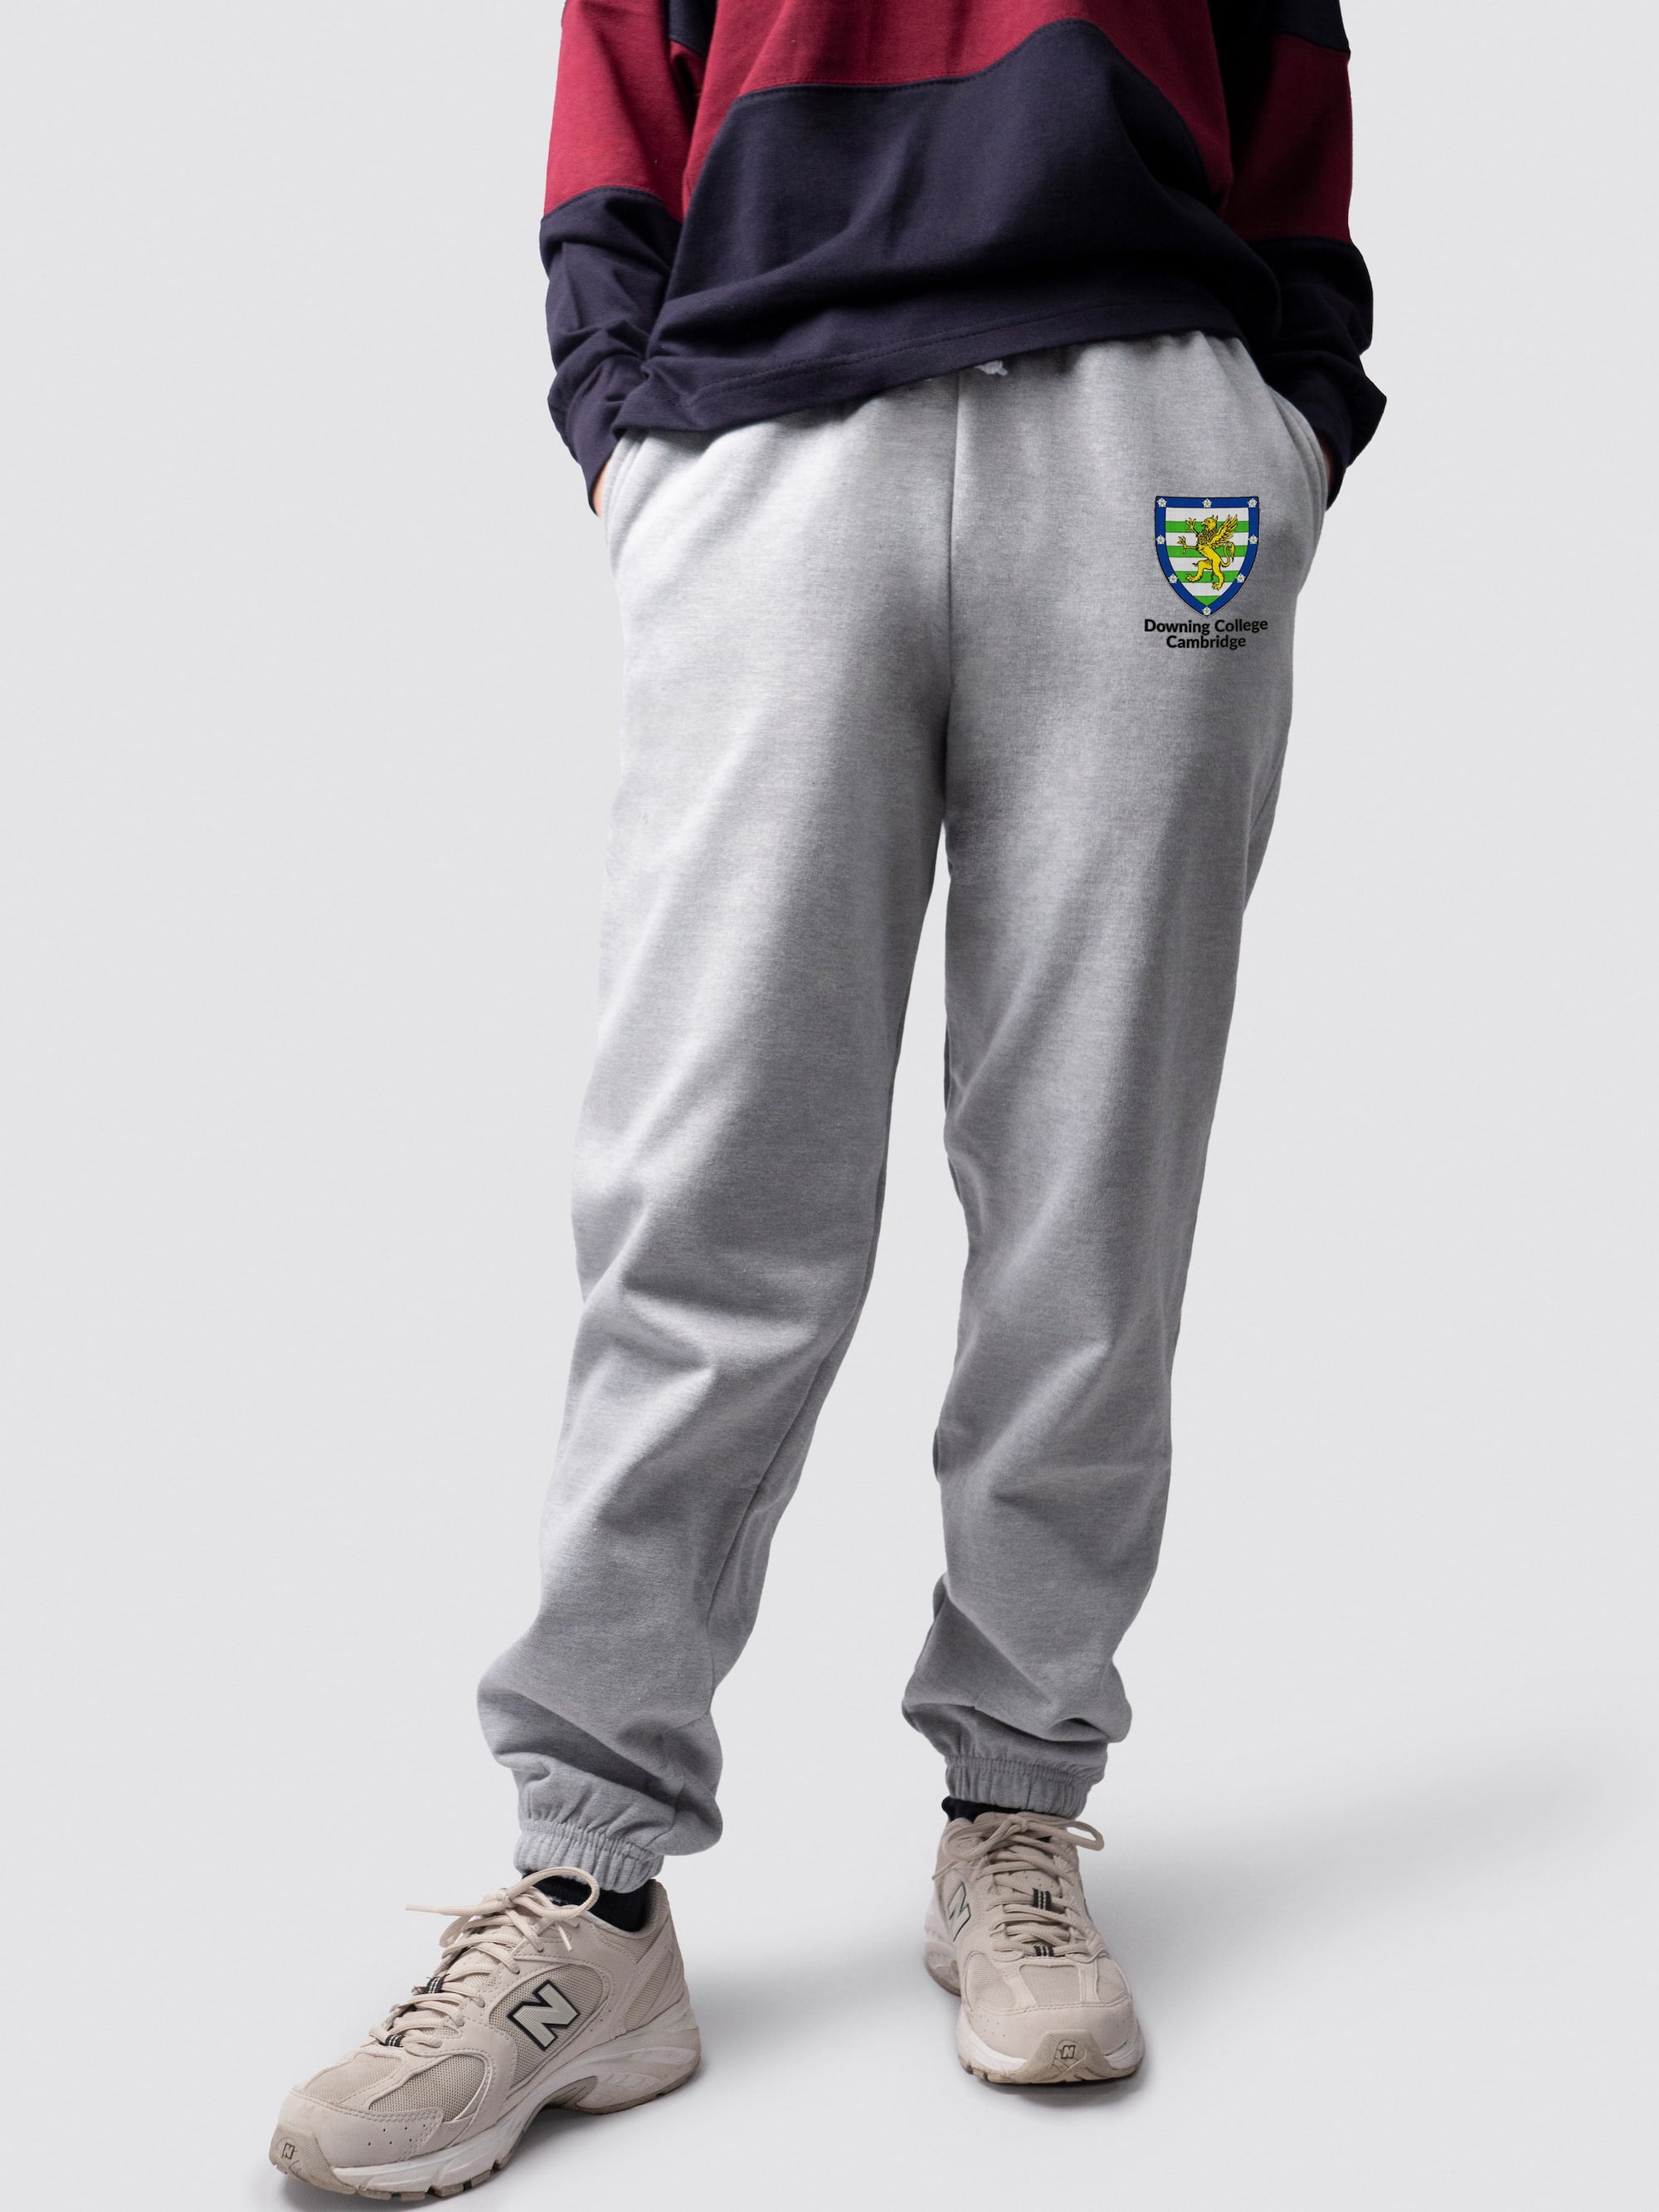 undergraduate cuffed sweatpants, made from soft cotton fabric, with Downing logo